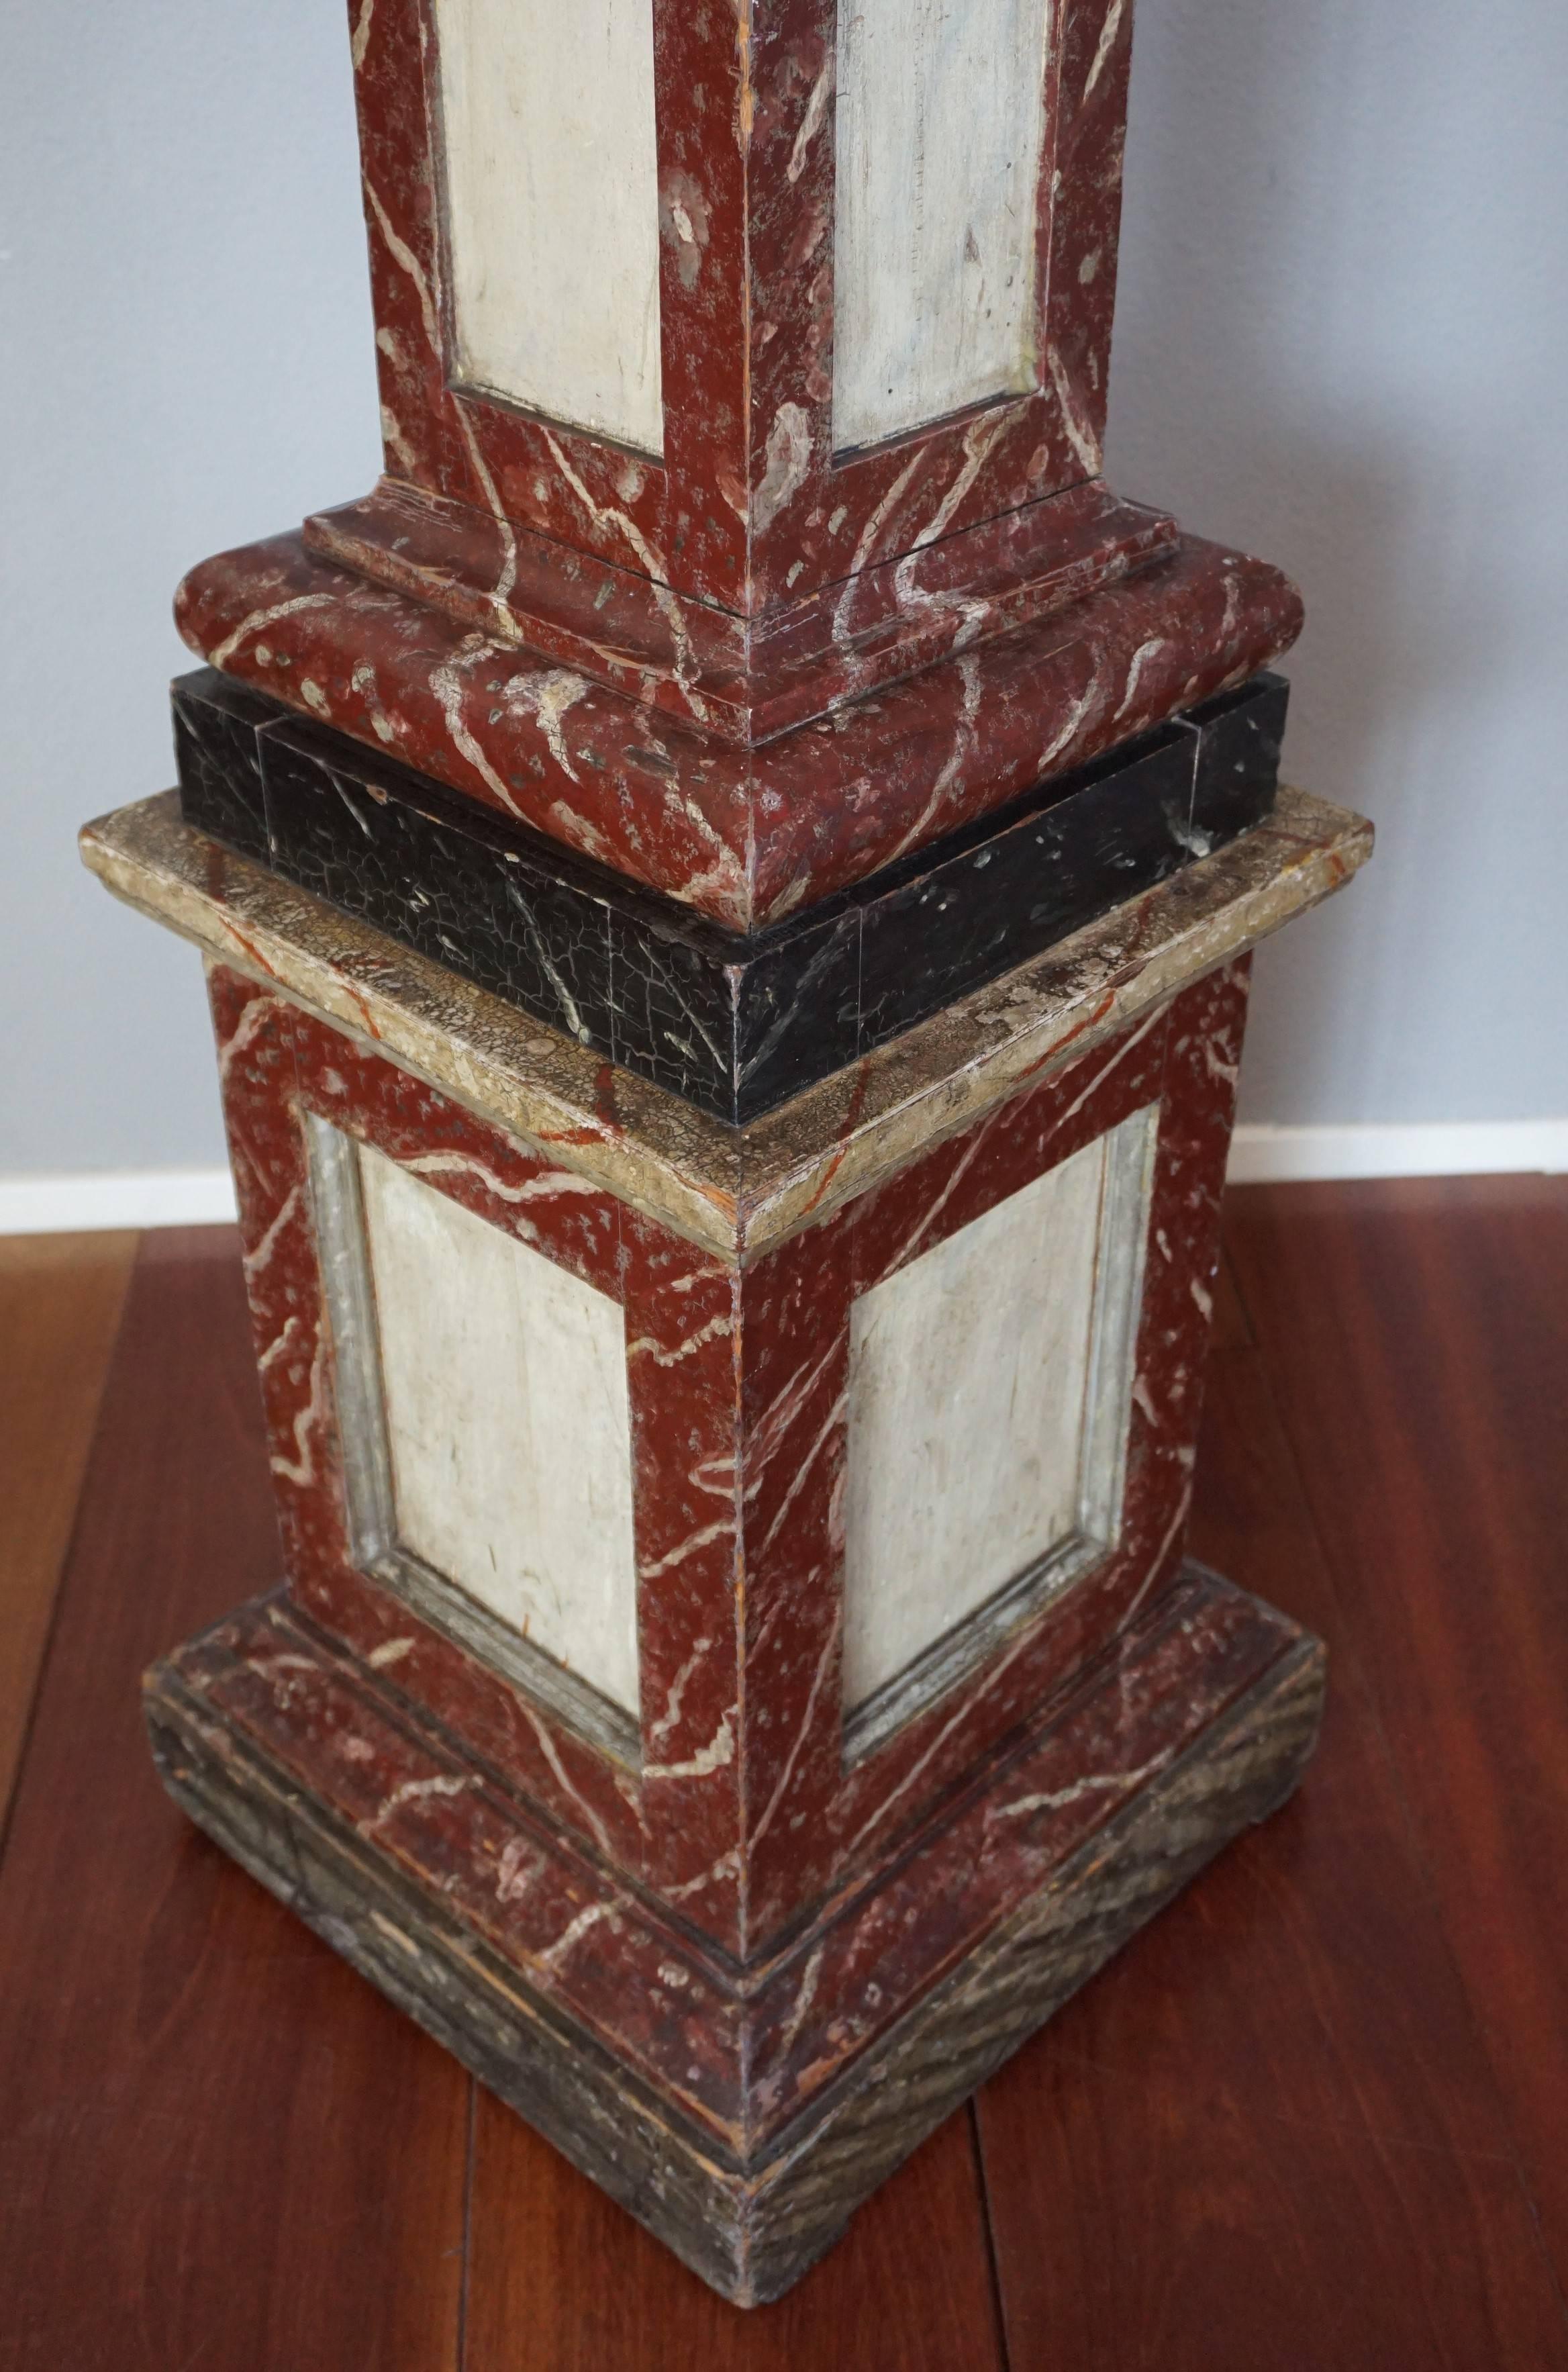 Rare and sizable Art Deco style sculpture stand from a church or monastery.

According to the former owners, who used this antique as a sculpture stand, it originally belonged to a church or a monastery. Nowadays, there are only a few craftsman left